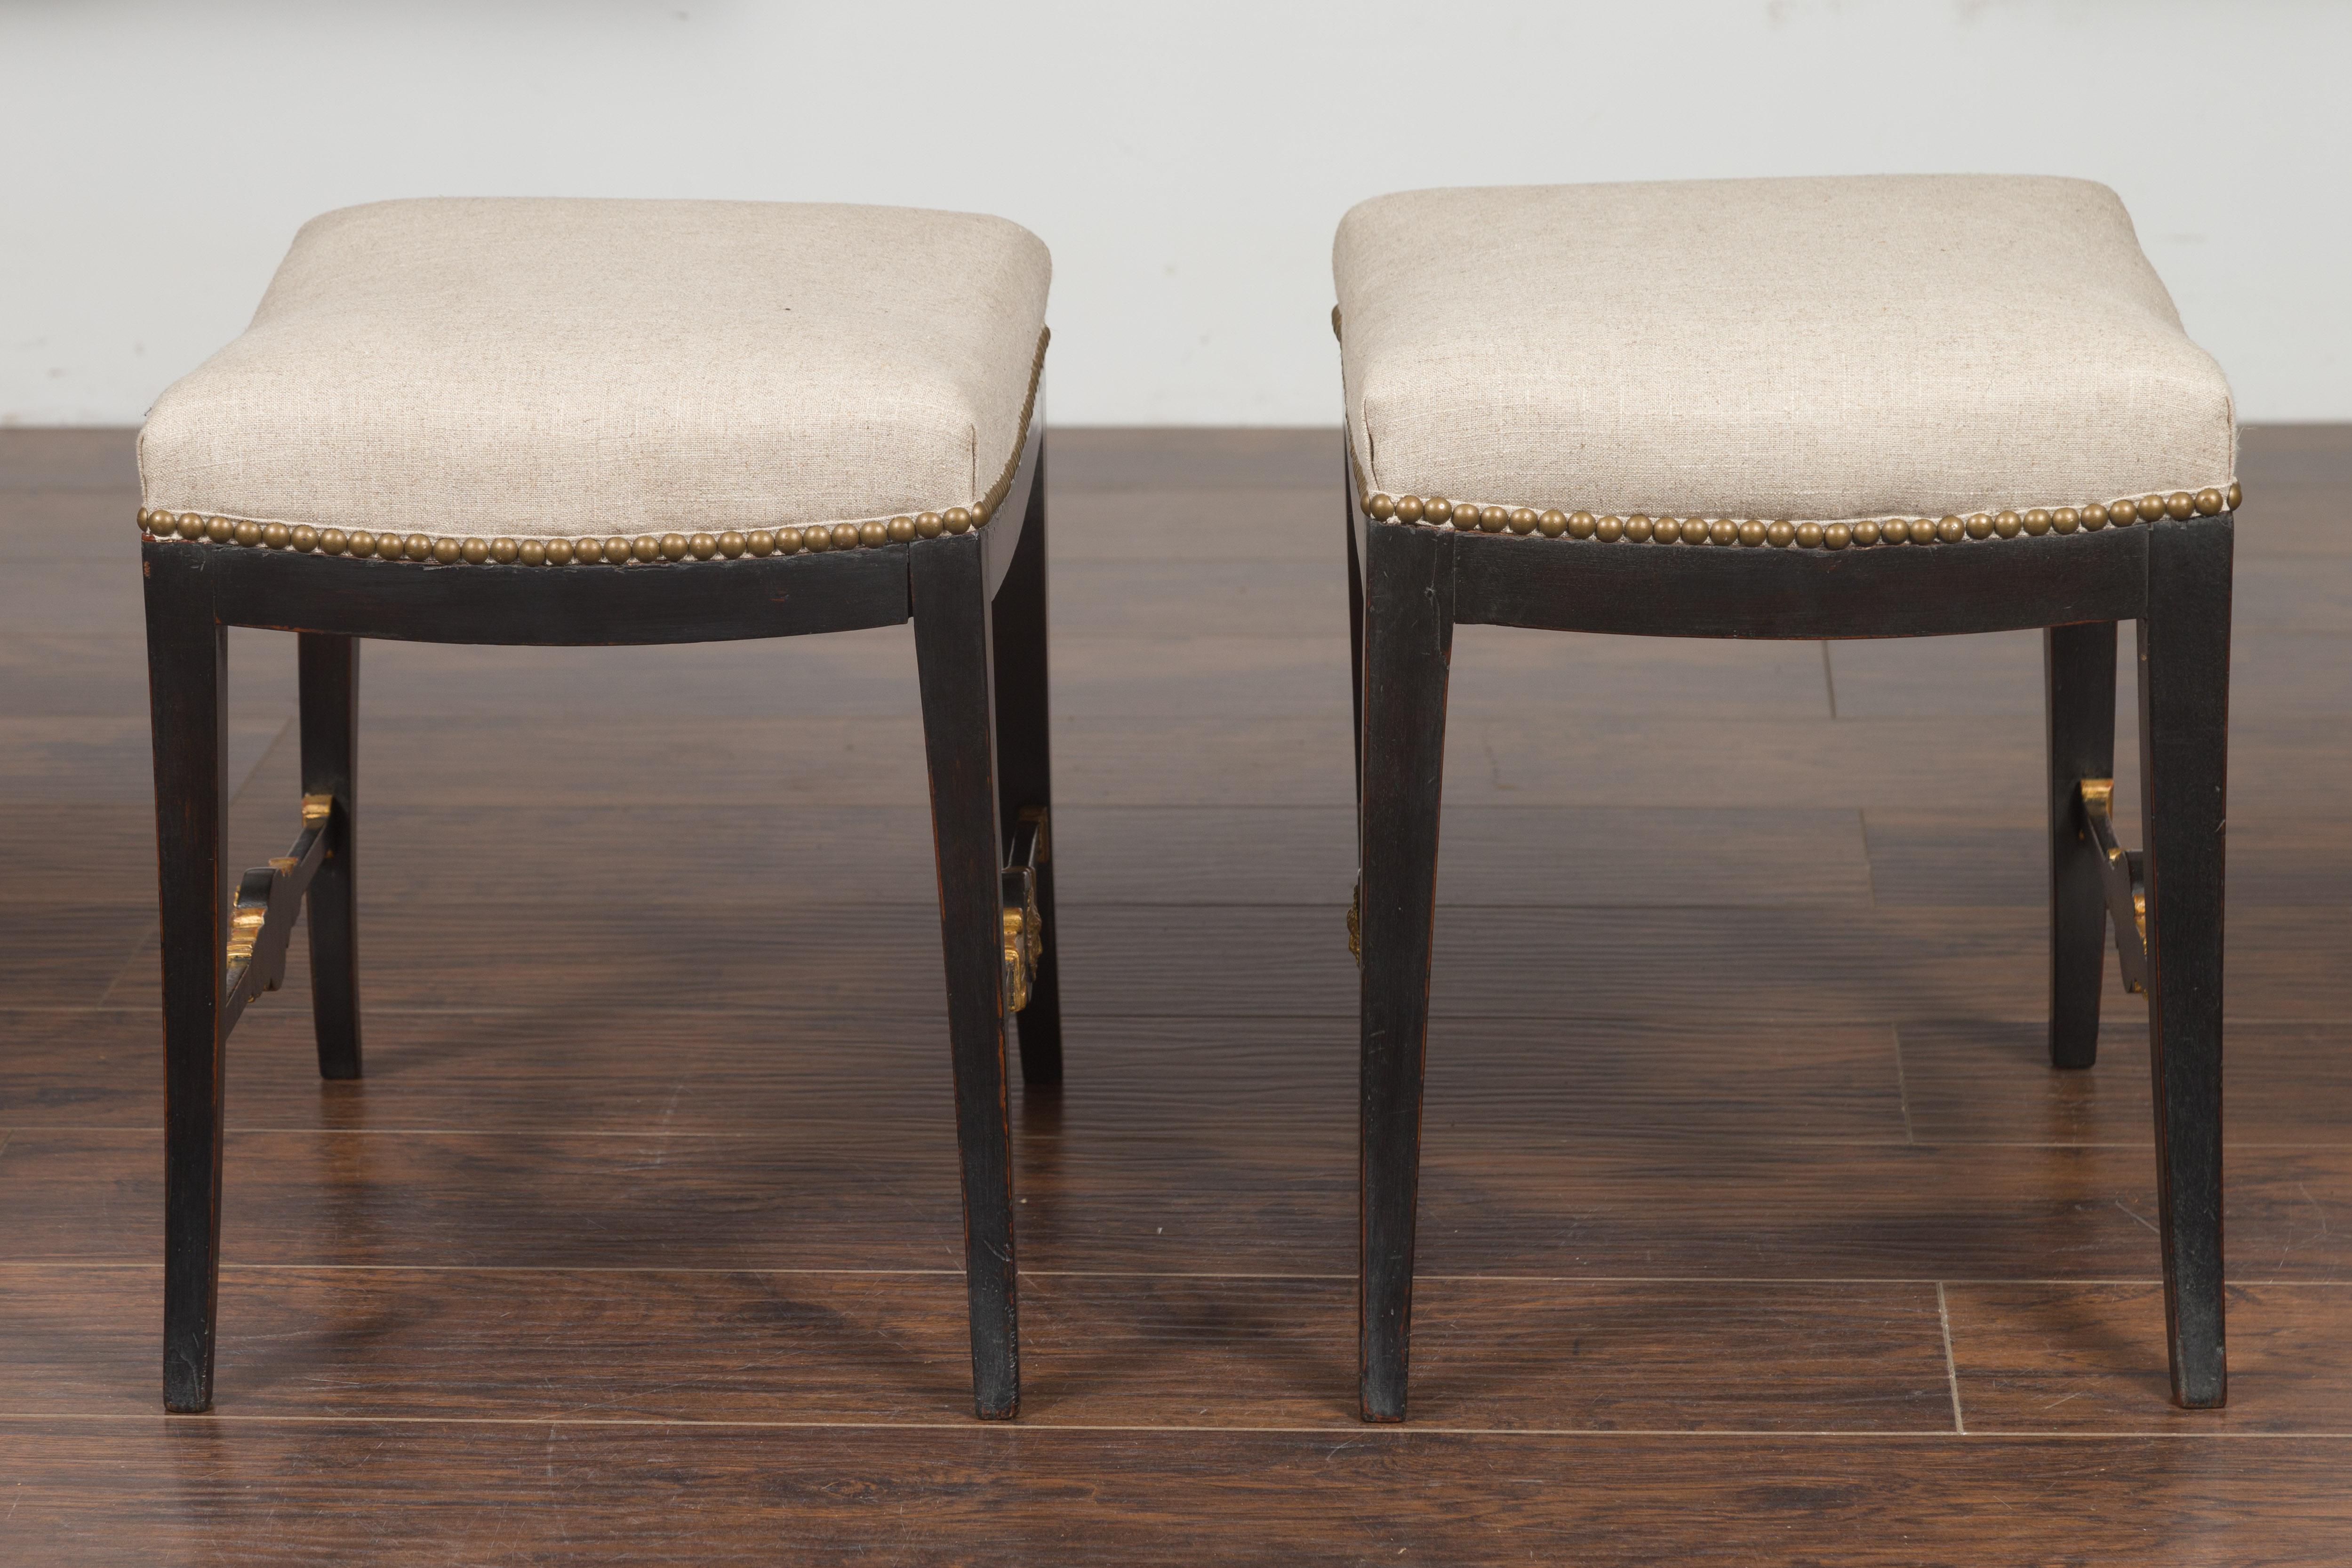 Pair of English Regency 1820s Ebonized and Gilt Stools with New Upholstery For Sale 6